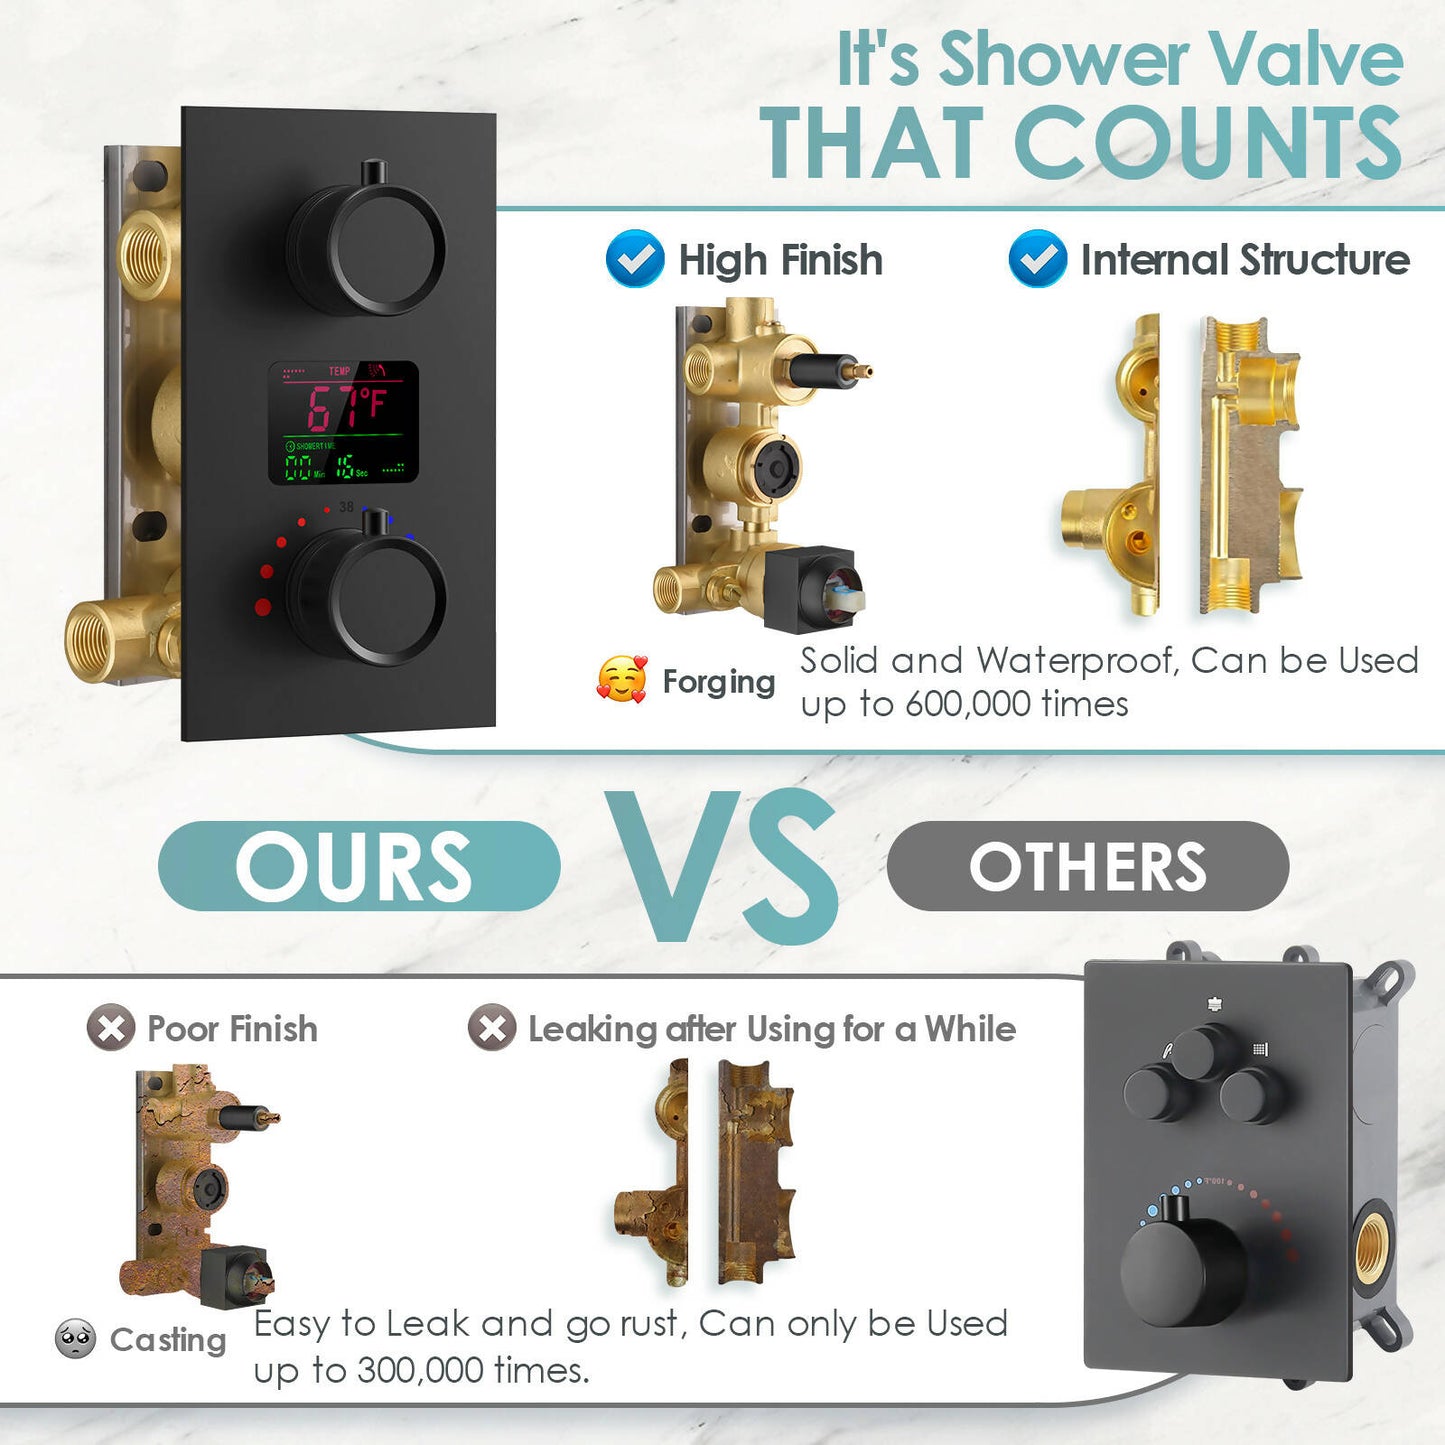 SmartTempFlow 12" High-Pressure Rainfall Shower Faucet, Wall Mount, Rough in-Valve, 2.5 GPM